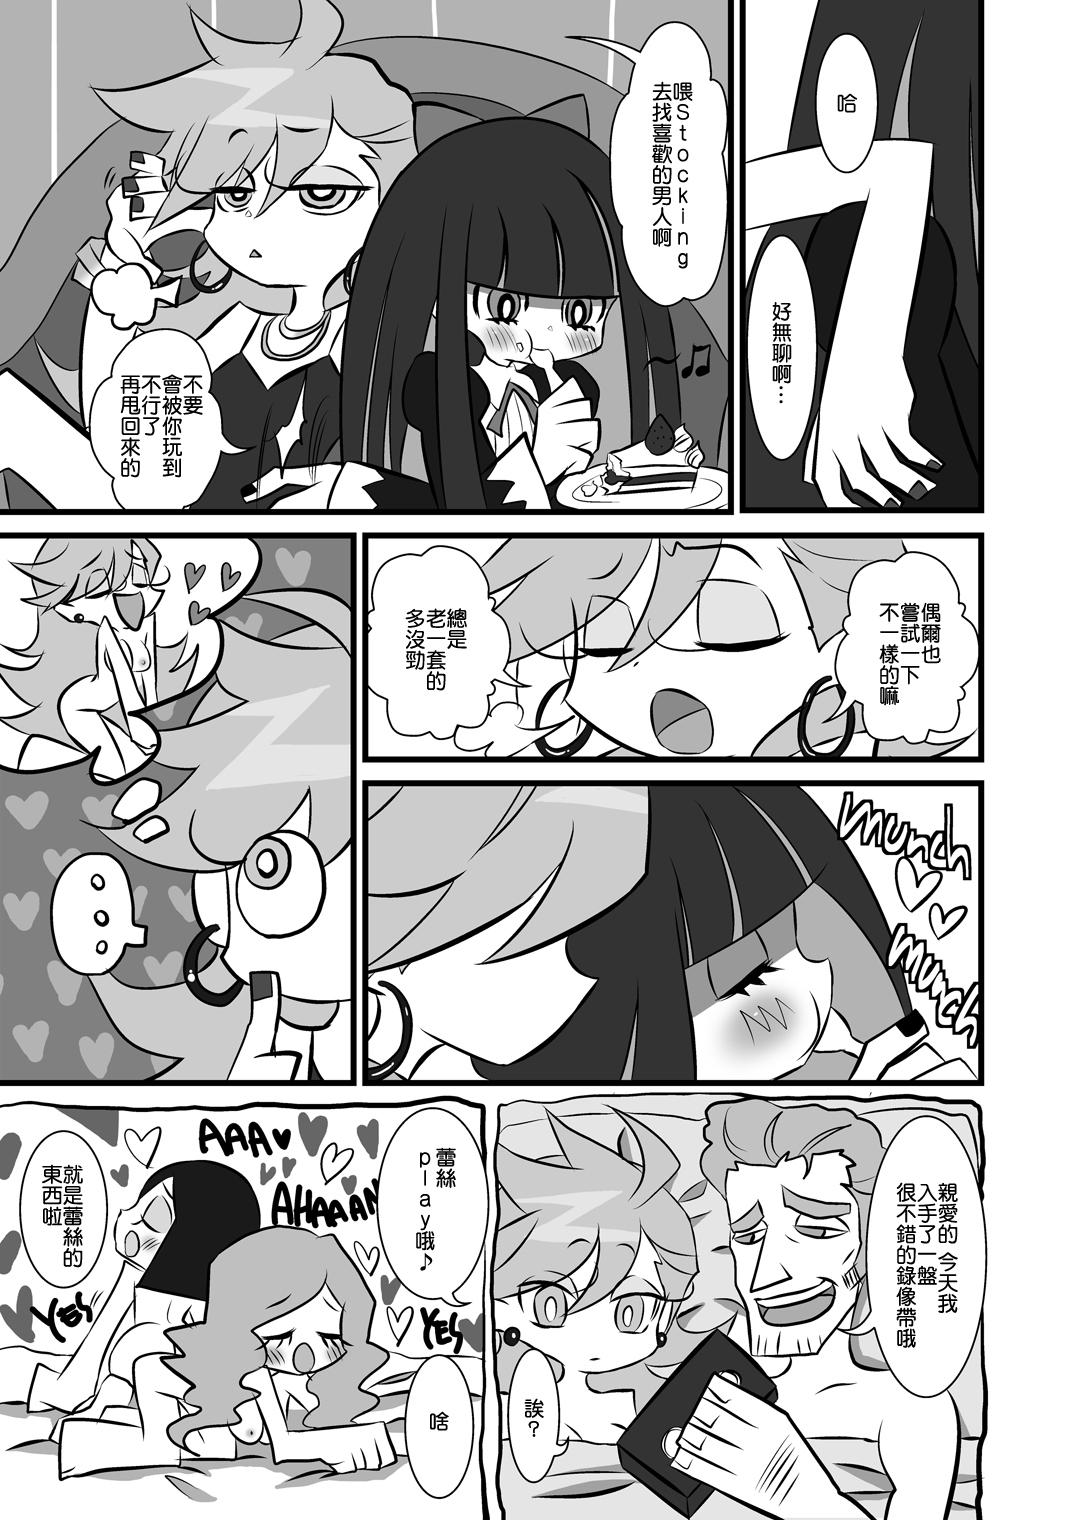 Student Chu Chu Les Play - lesbian play - Panty and stocking with garterbelt 18 Porn - Page 5